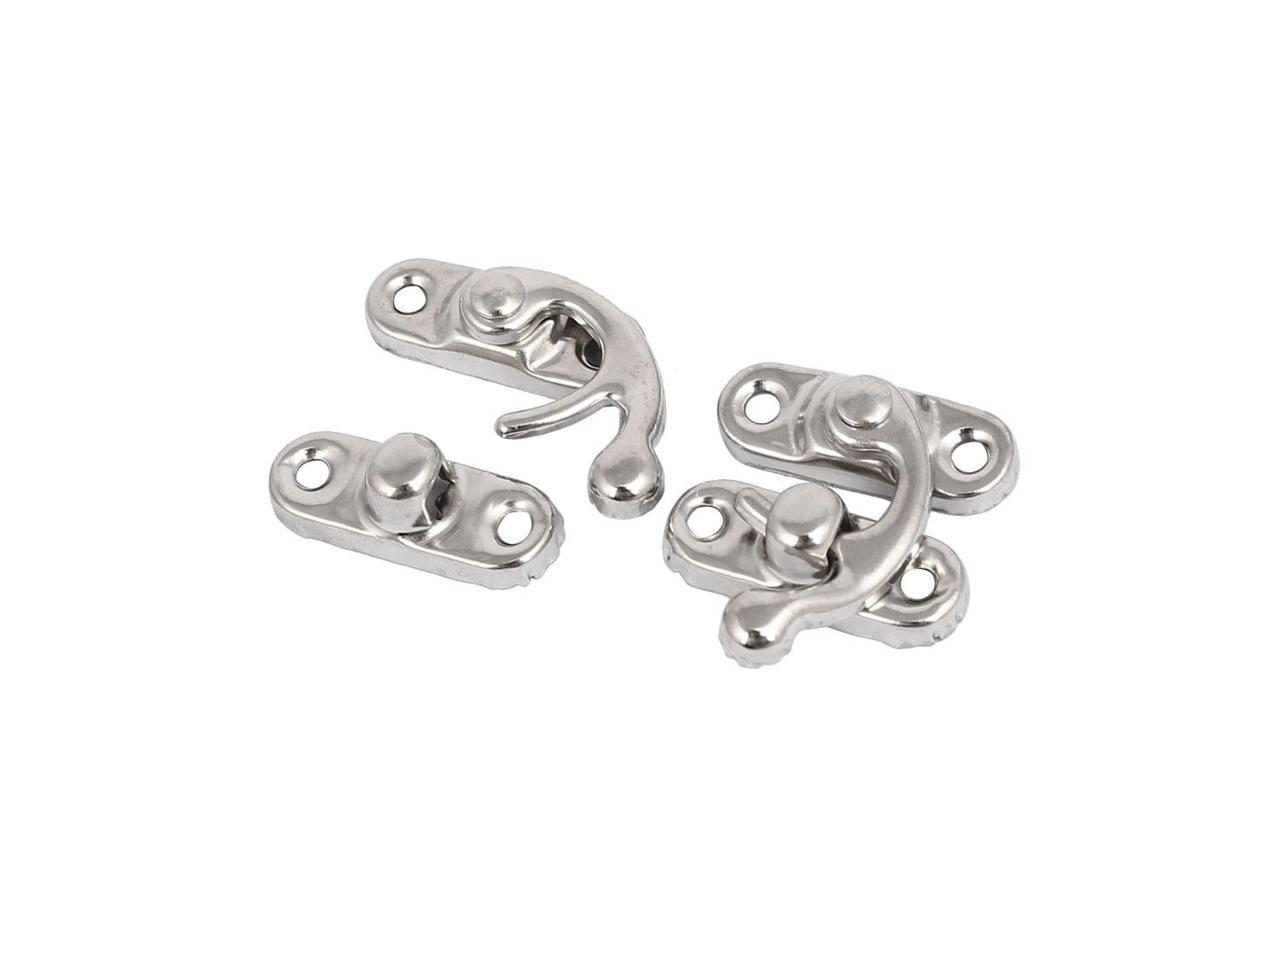 Gift Box Right Swing Arm Clasp Latches Catch Toggle Hasp Silver Tone ...